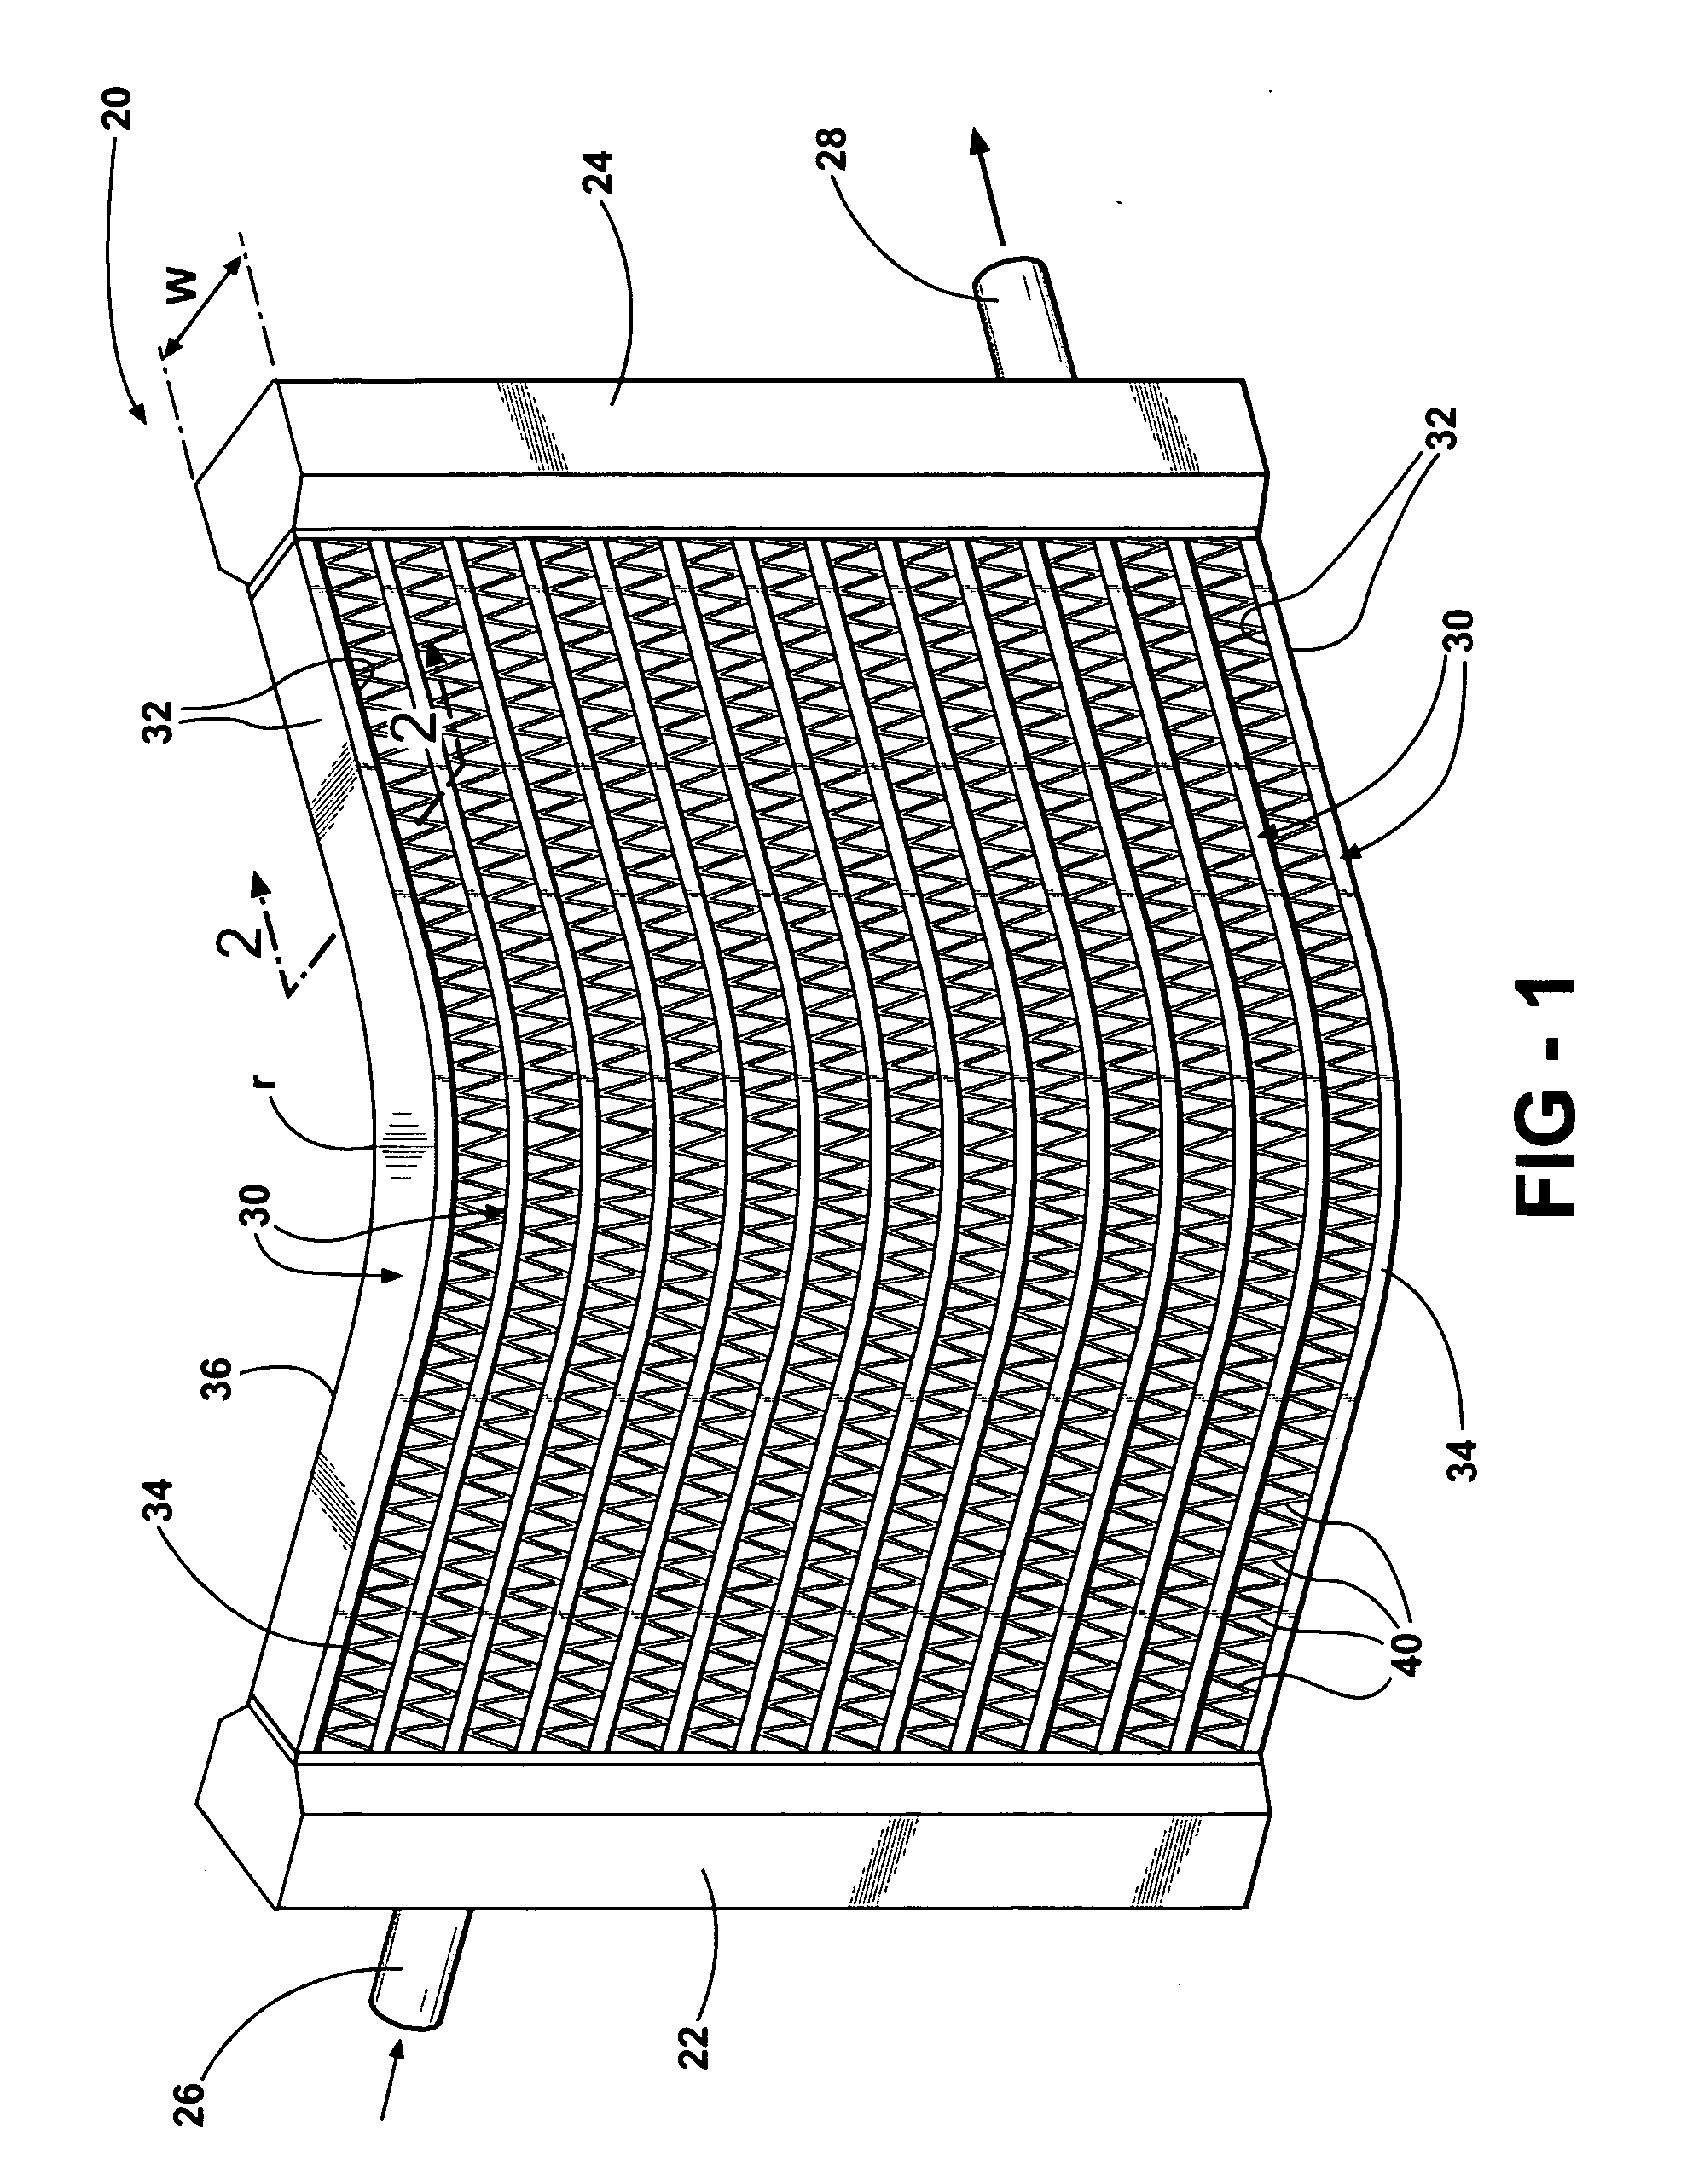 Microchannel, flat tube heat exchanger with bent tube configuration